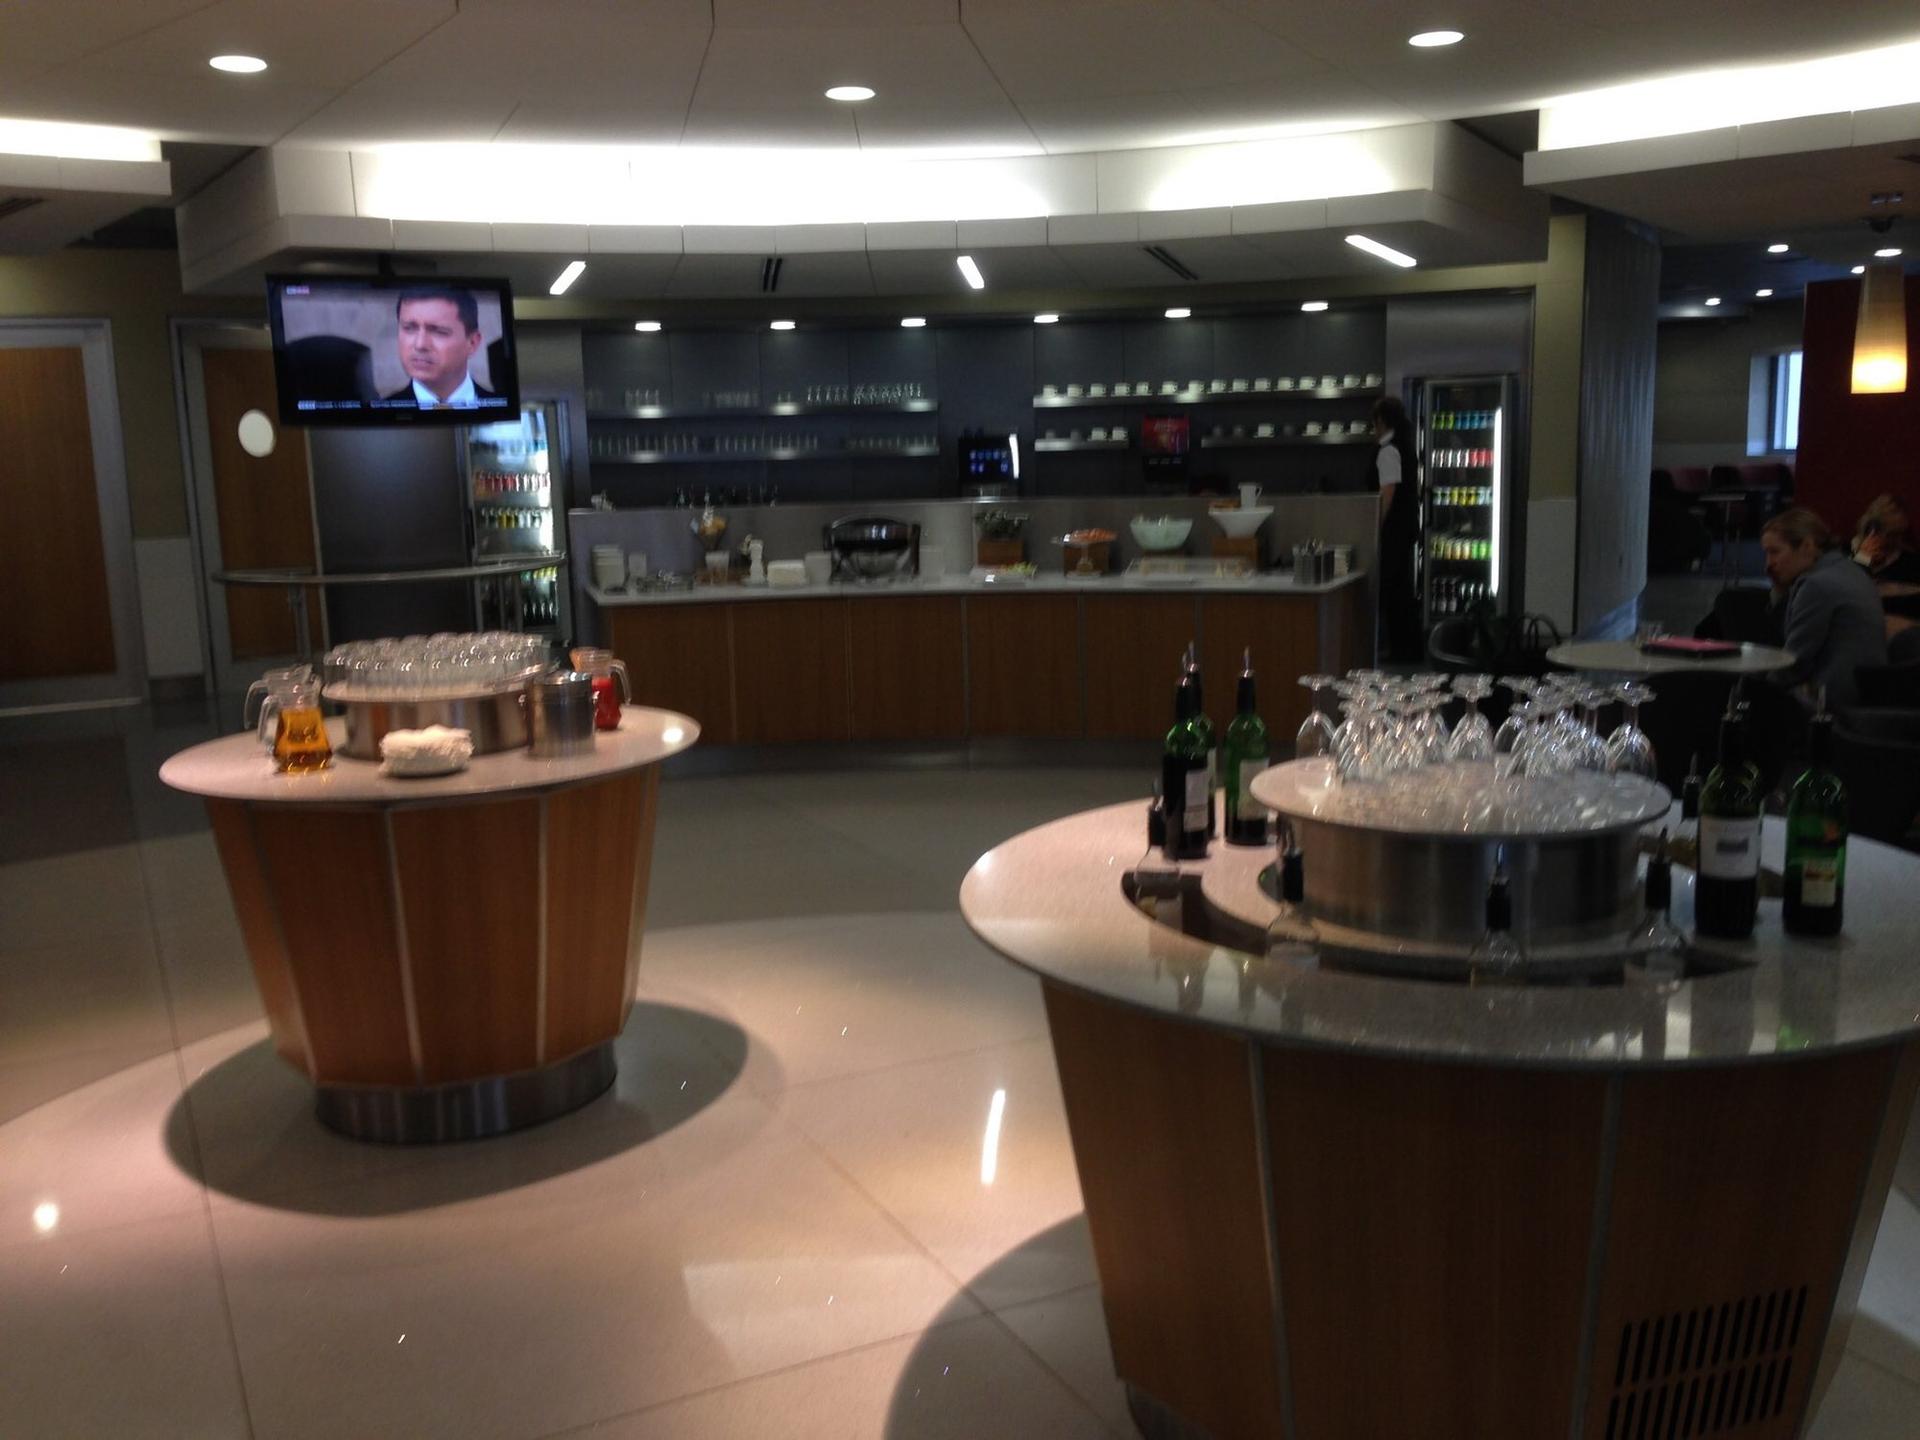 American Airlines Admirals Club image 13 of 38